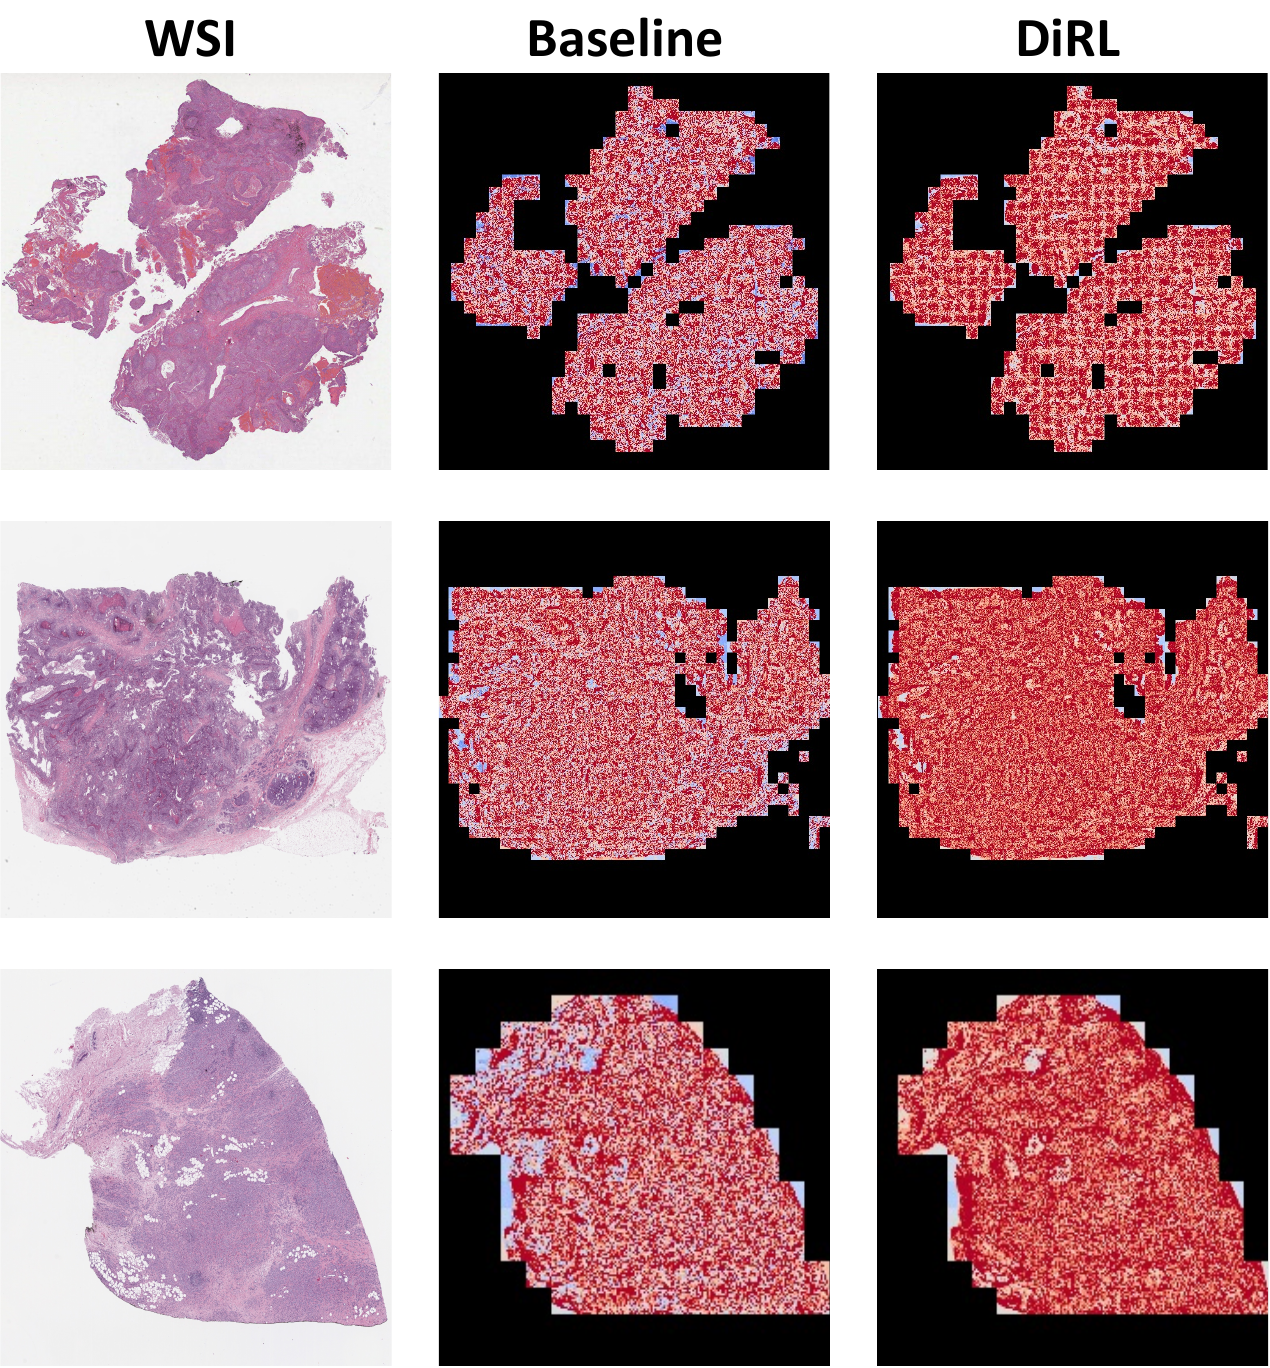 Attention De-sparsification Matters: Inducing Diversity in Digital
  Pathology Representation Learning